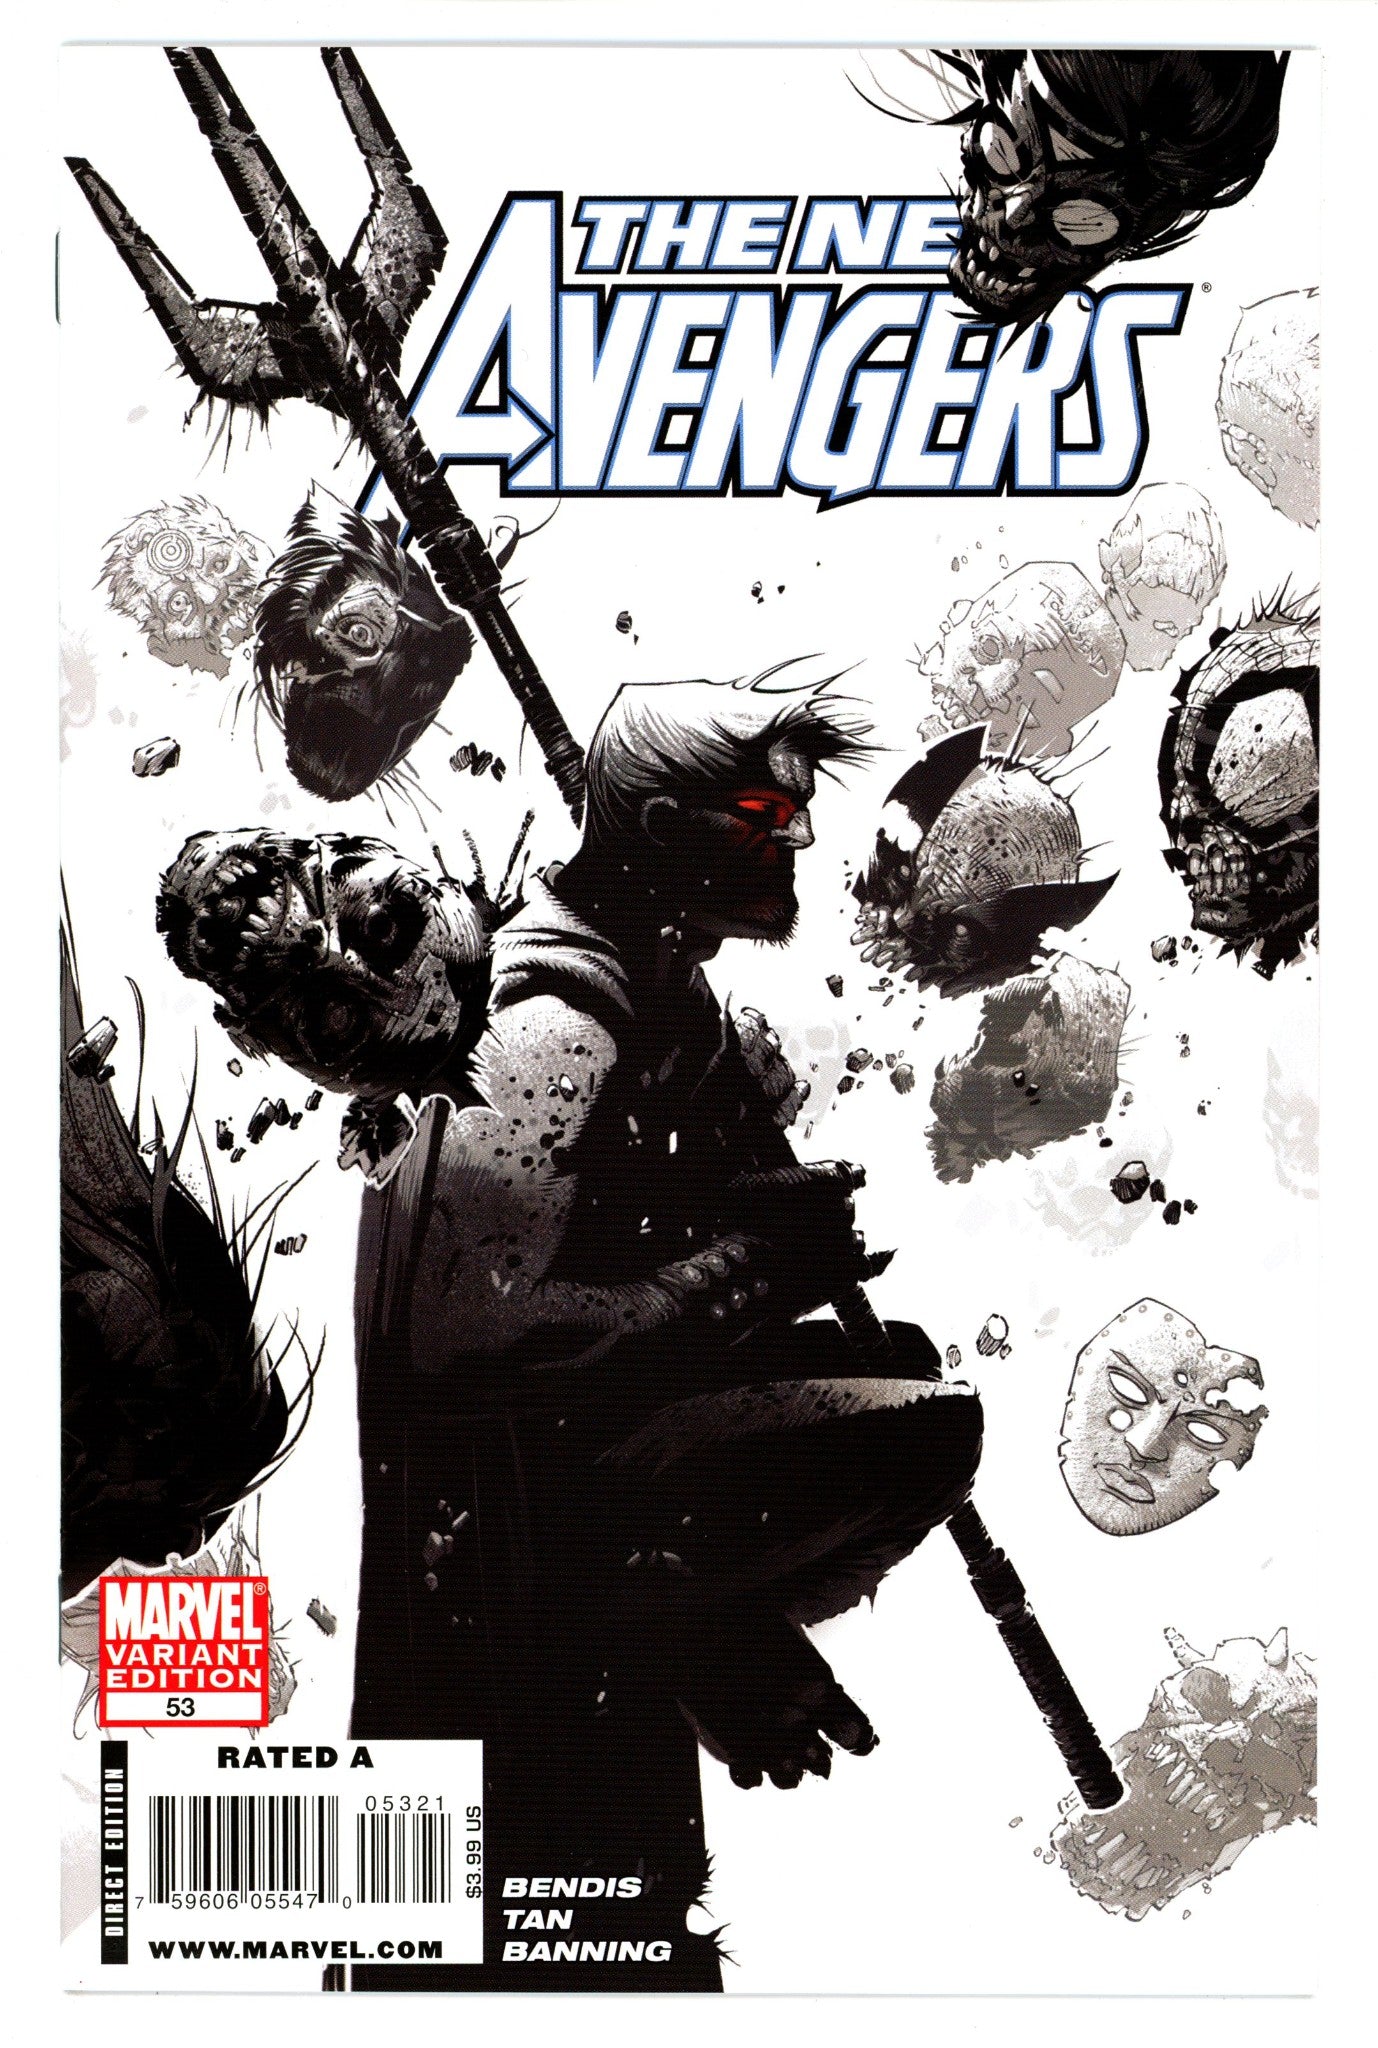 New Avengers Vol 1 53 NM- (9.2) (2009) Bachalo Incentive Variant 